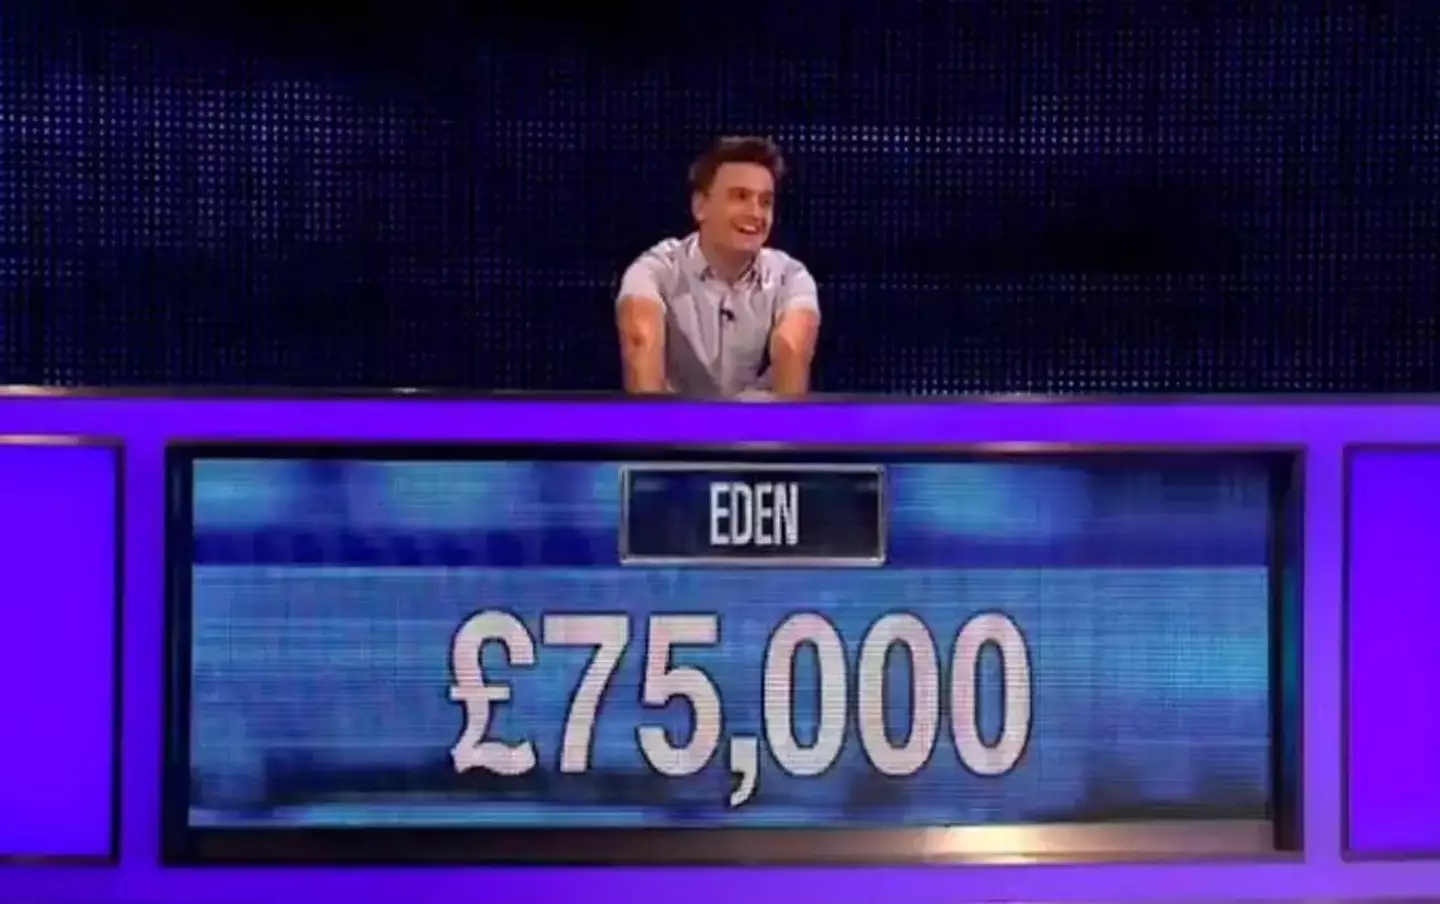 "That is the highest ever single win in TV quiz show history."